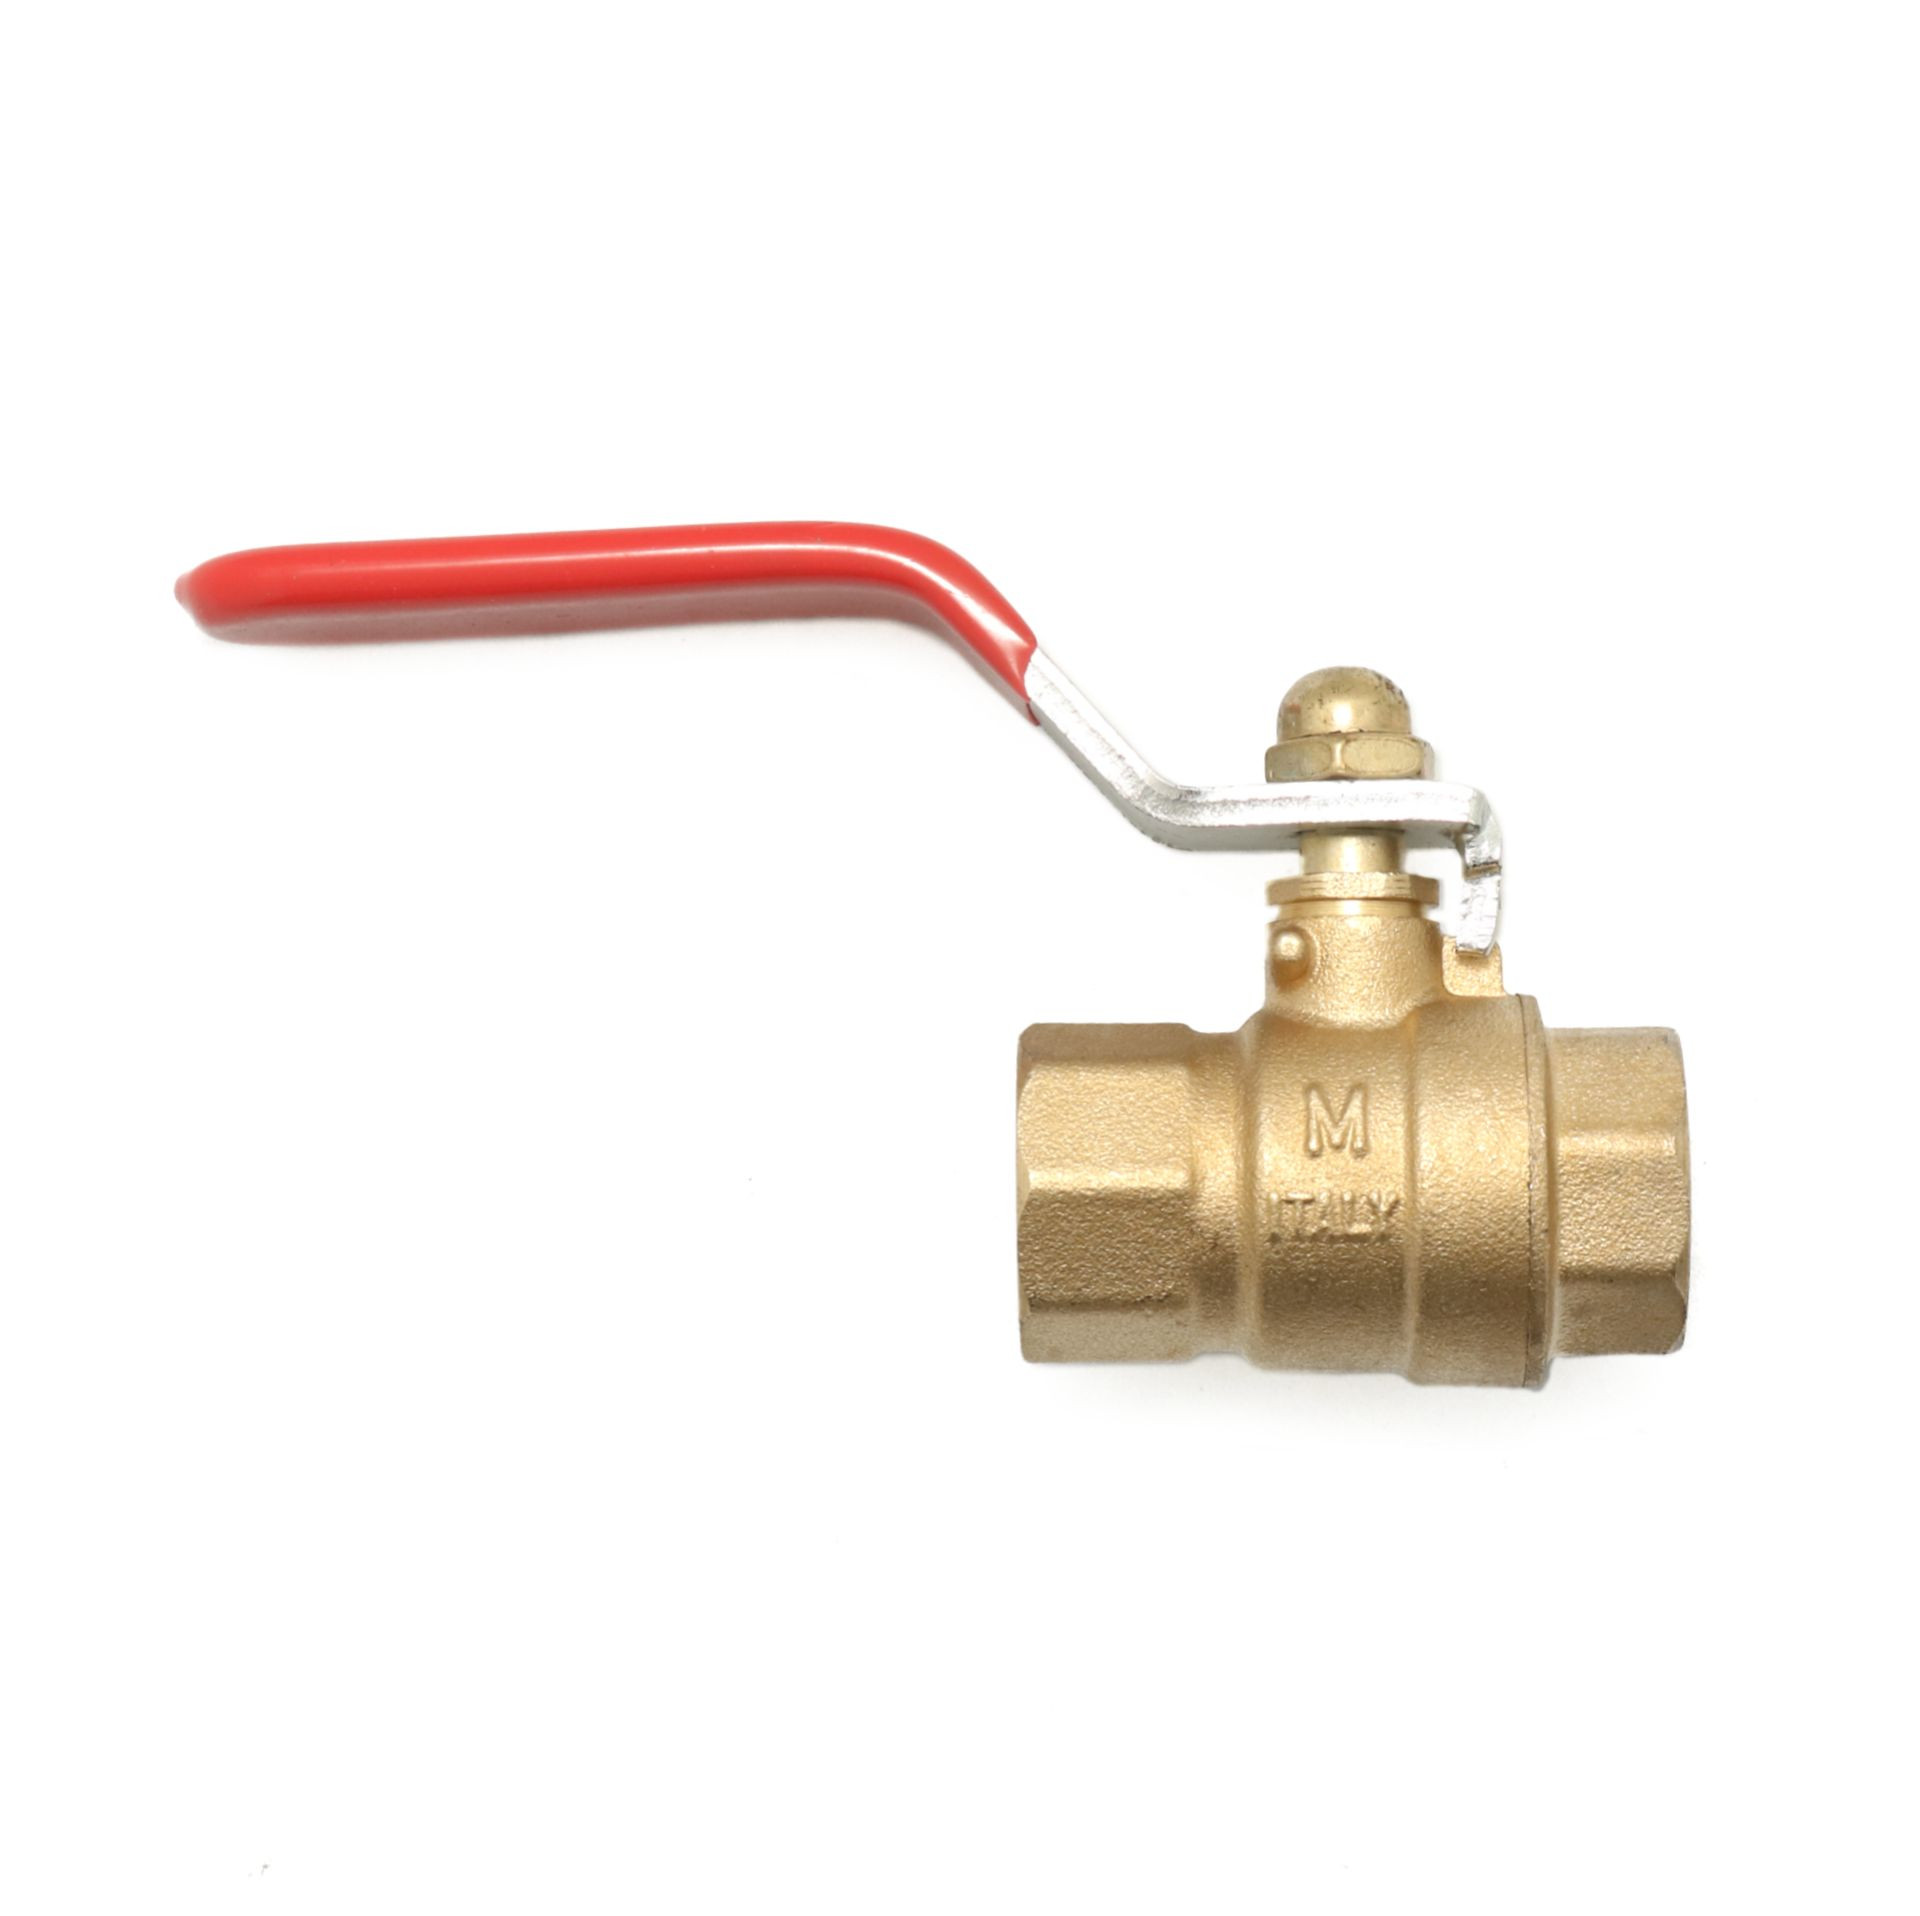 Price of Ball Valve 1/2" online in Nepal. || Online Shopping in